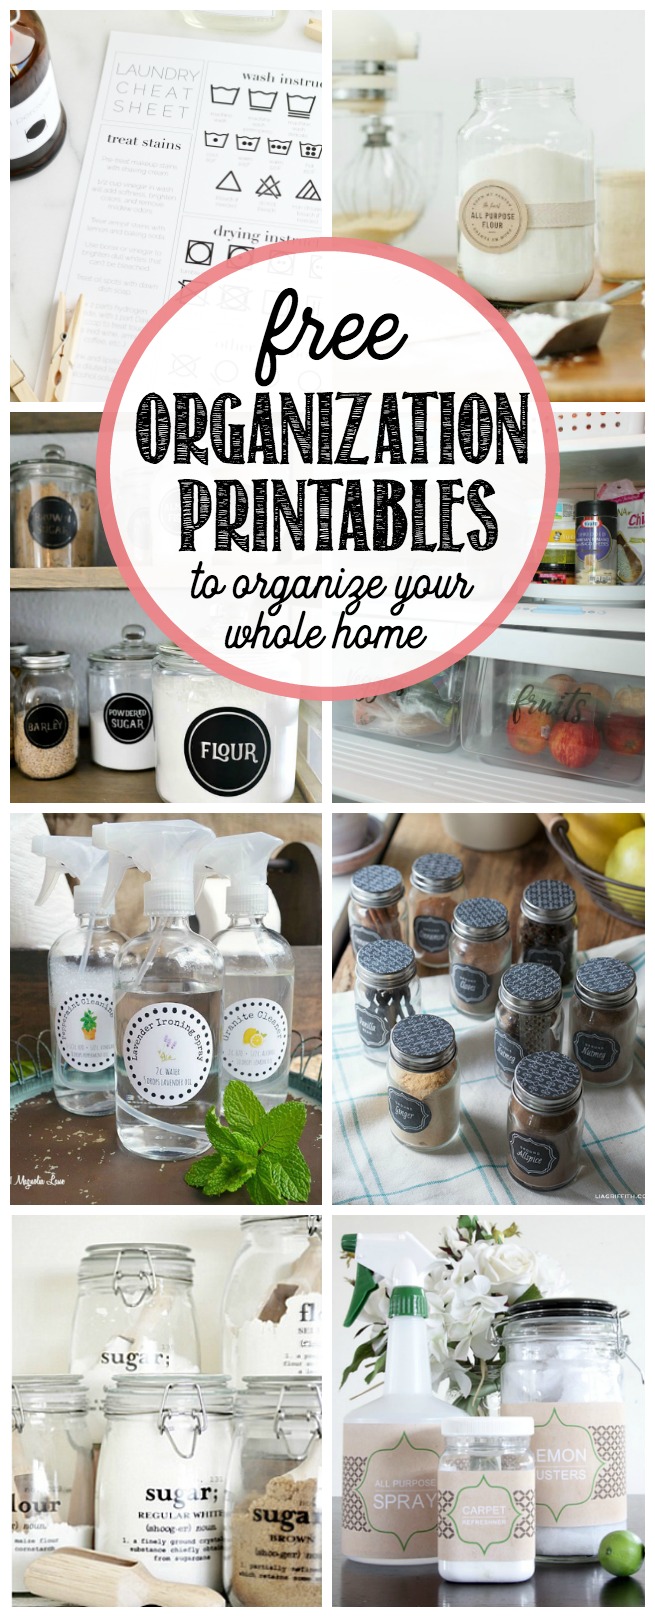 Get your whole home organized with this collection of free organization printables. Love these!